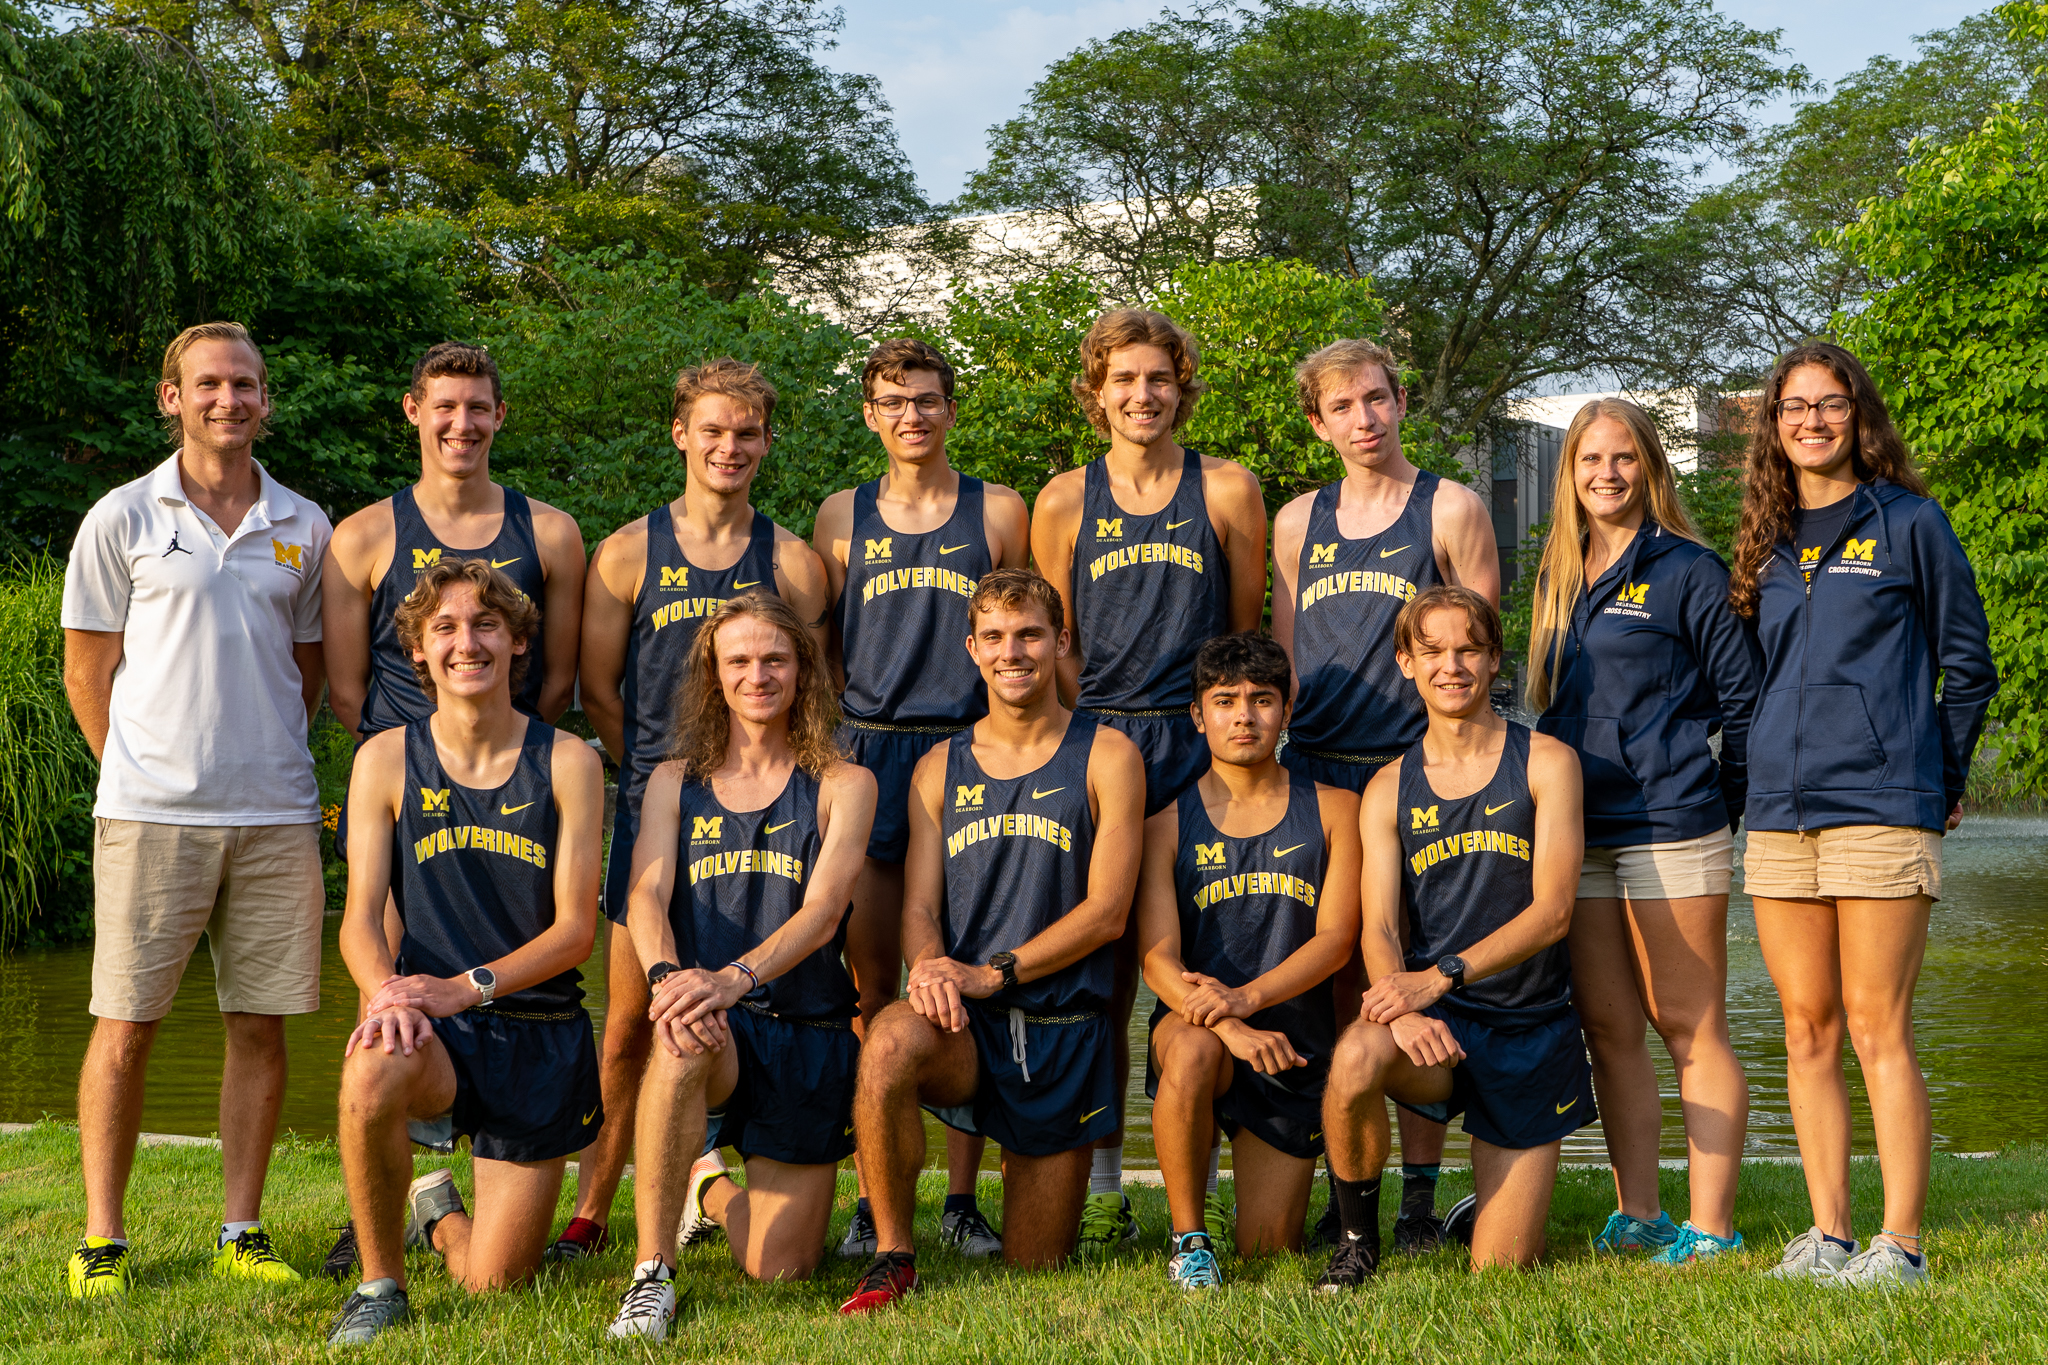 Men's Cross Country finishes 5th in the Calvin Knight Invitational